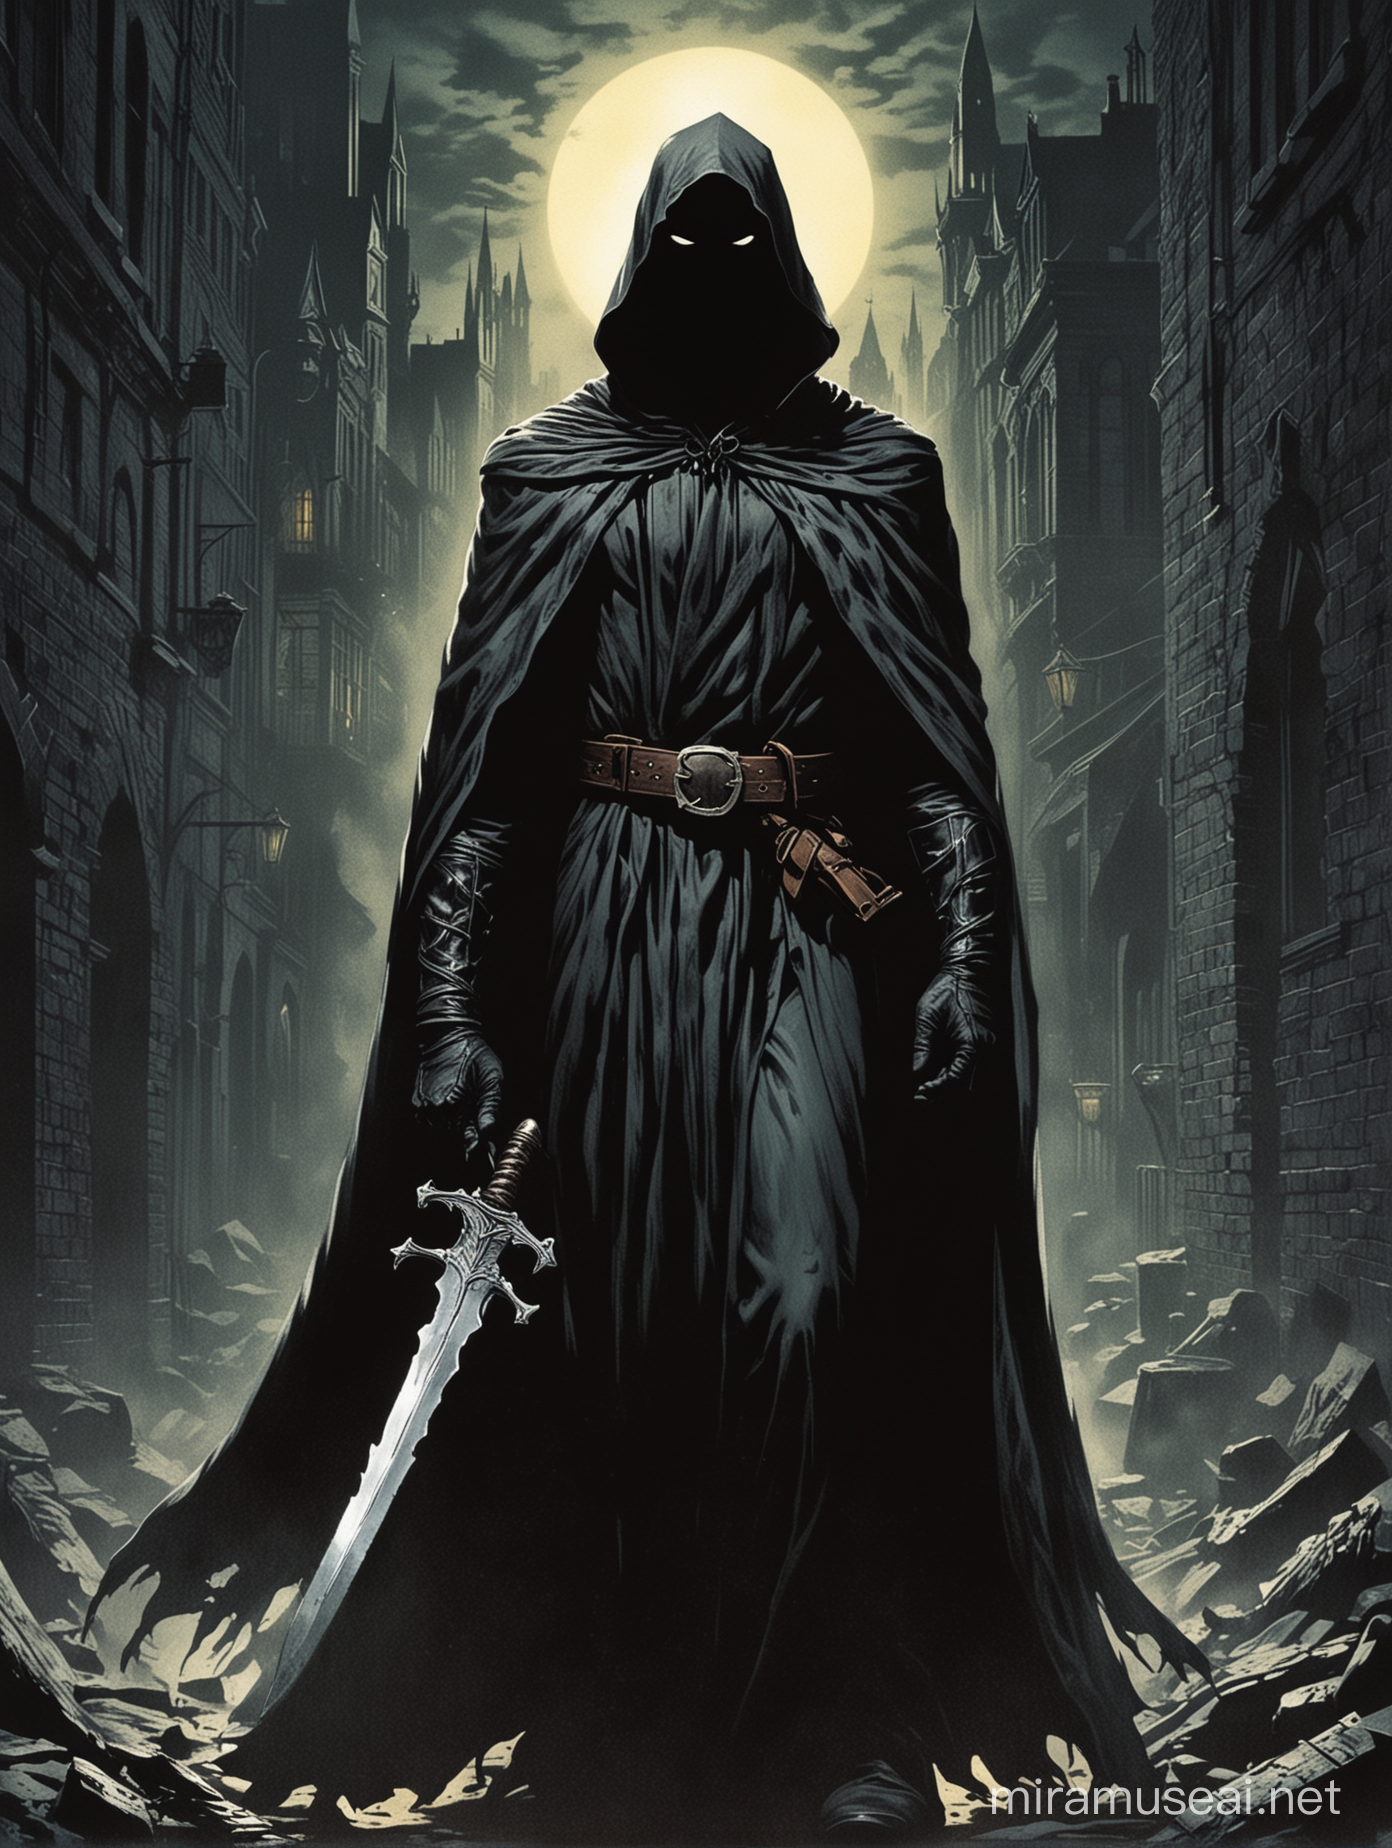 cloaked figure holding dagger the shadow dark city scene 1970s marvel comic book cover style